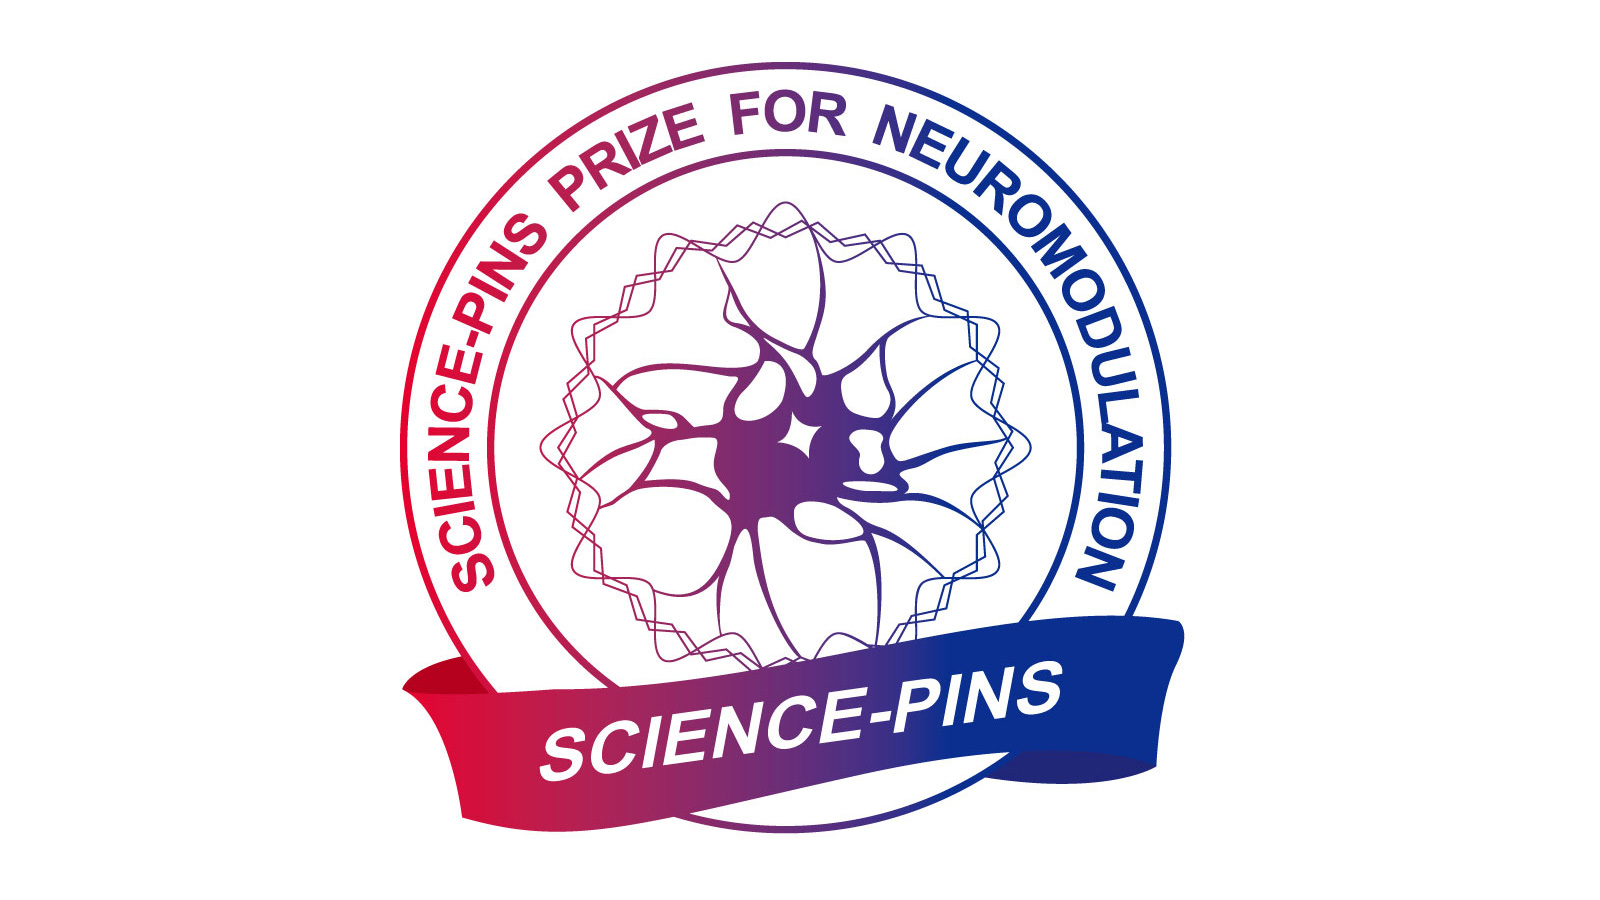 Science and PINS Prize for Neuromodulation logo